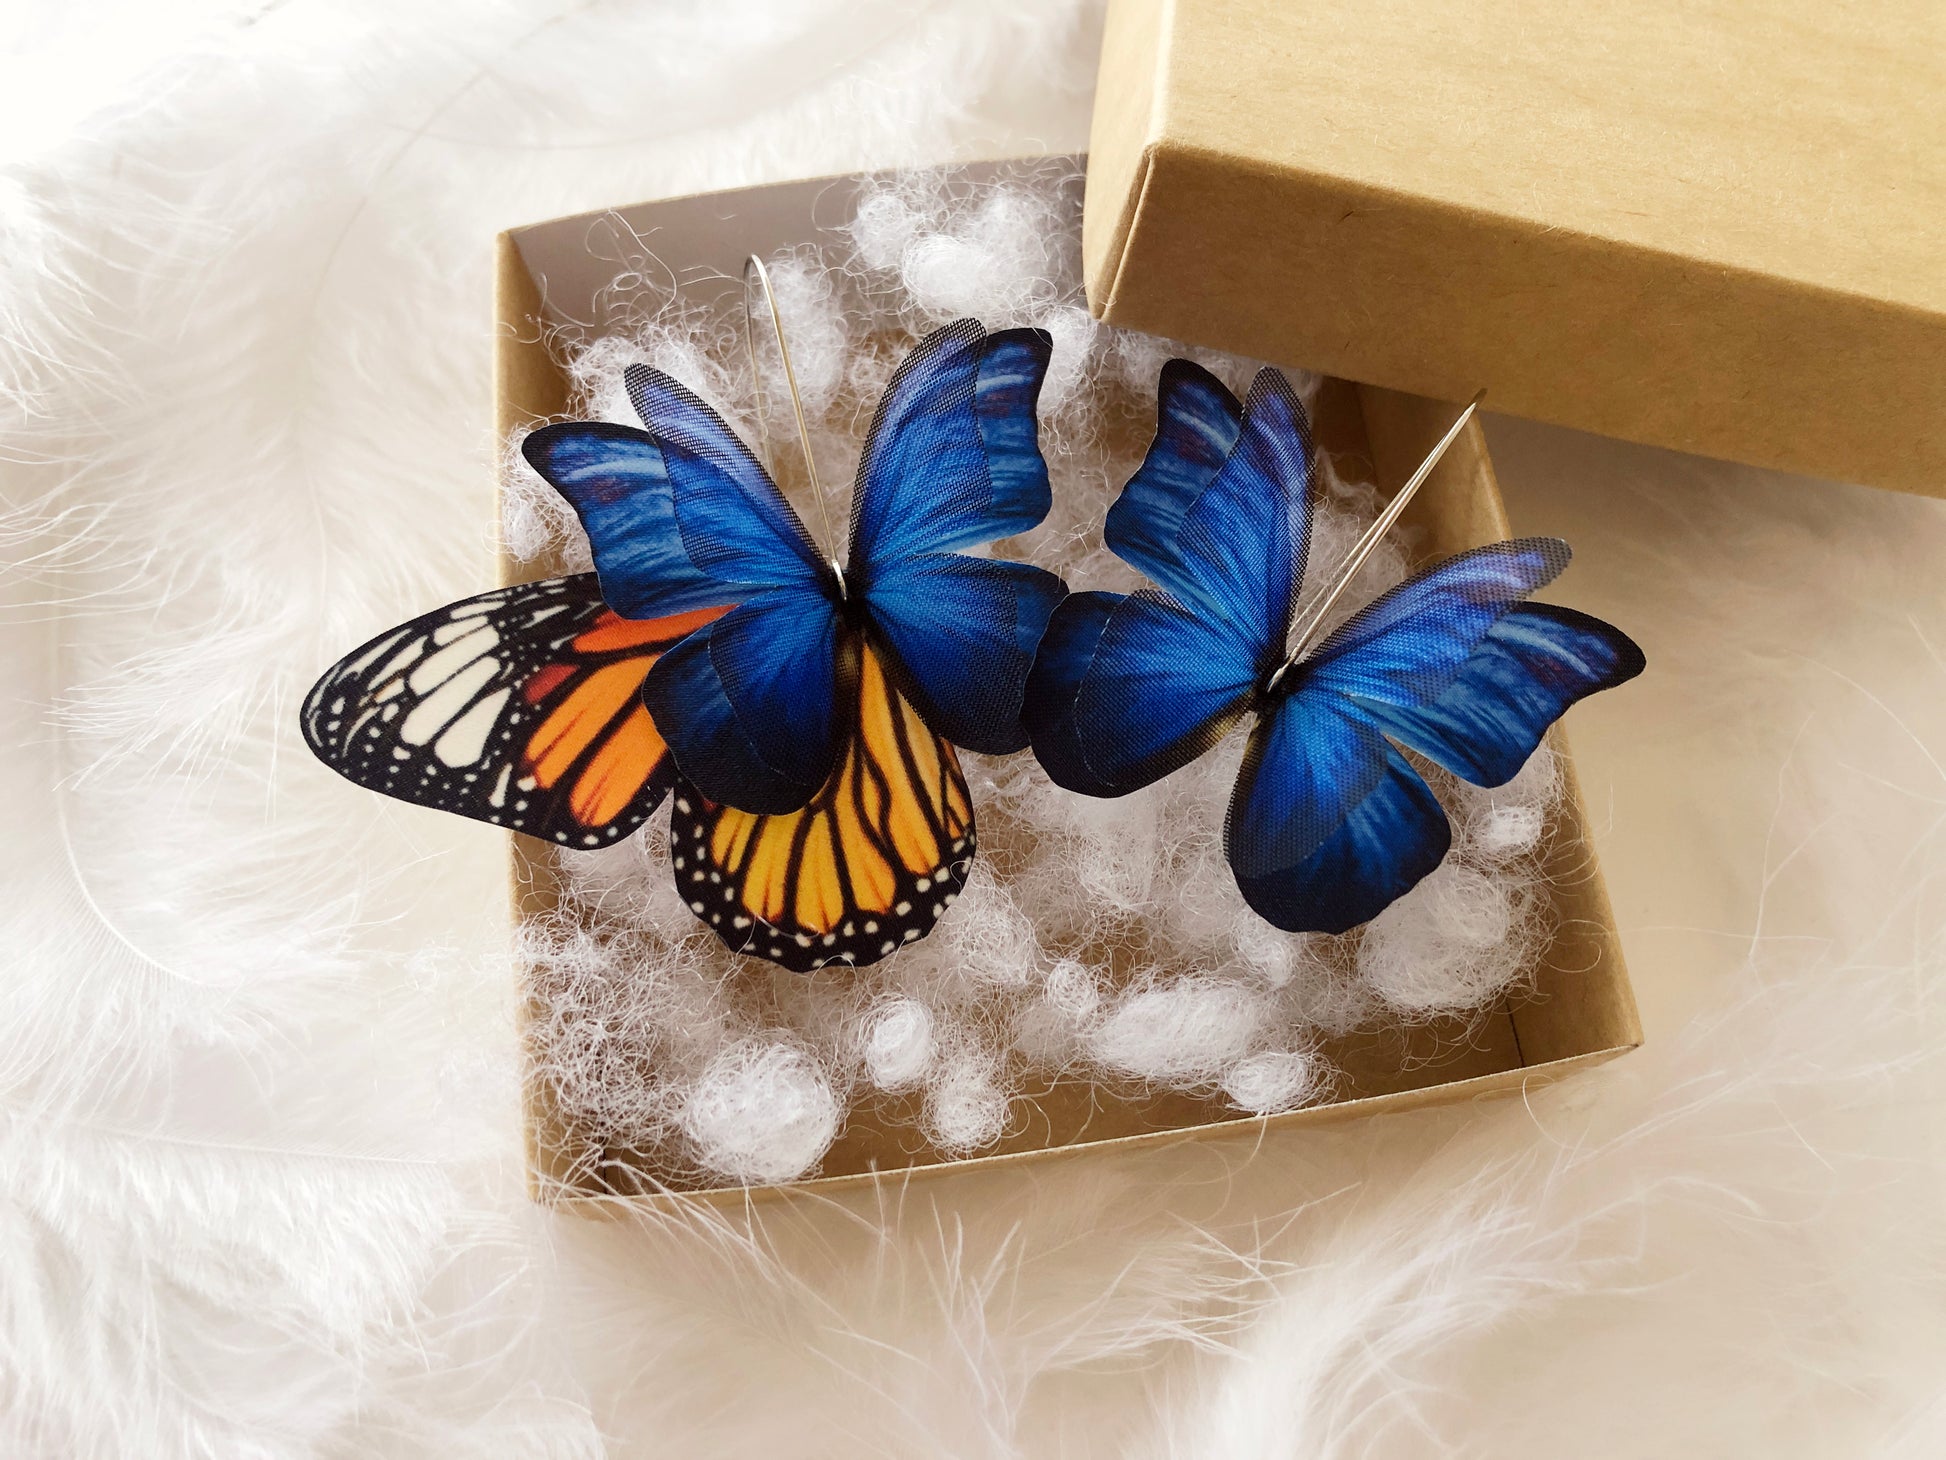 Korean-style earrings featuring vibrant blue butterfly wings and floral designs